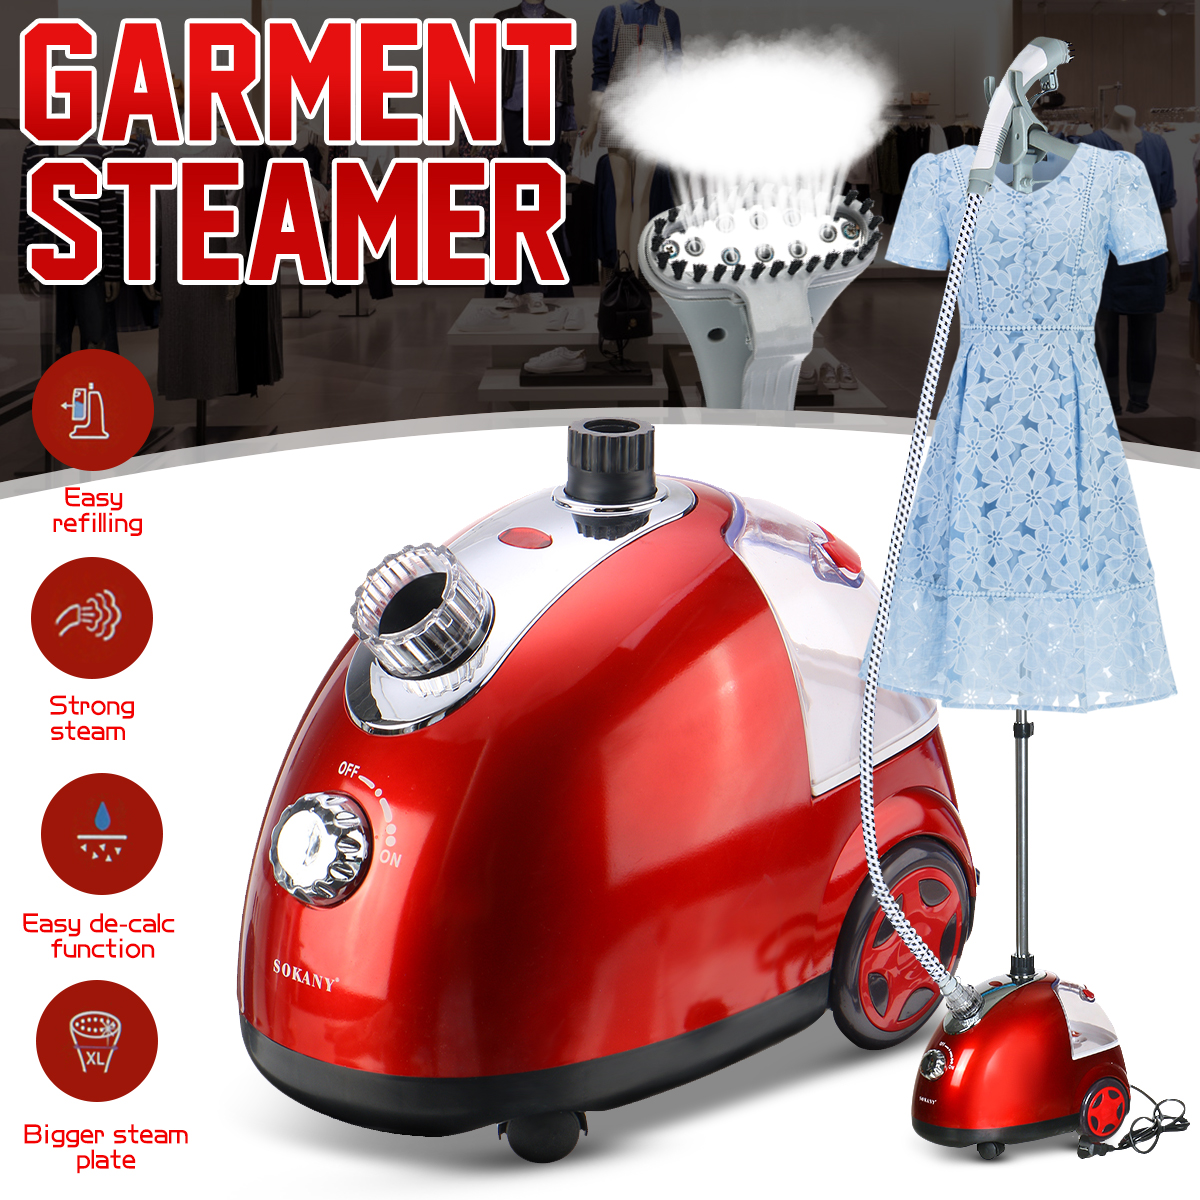 SOKANY-2000W-Clothing-Garment-Steamer-Portable-Fabric-Steamer-Vertical-Iron-Machine-for-Clothes-with-1937409-1